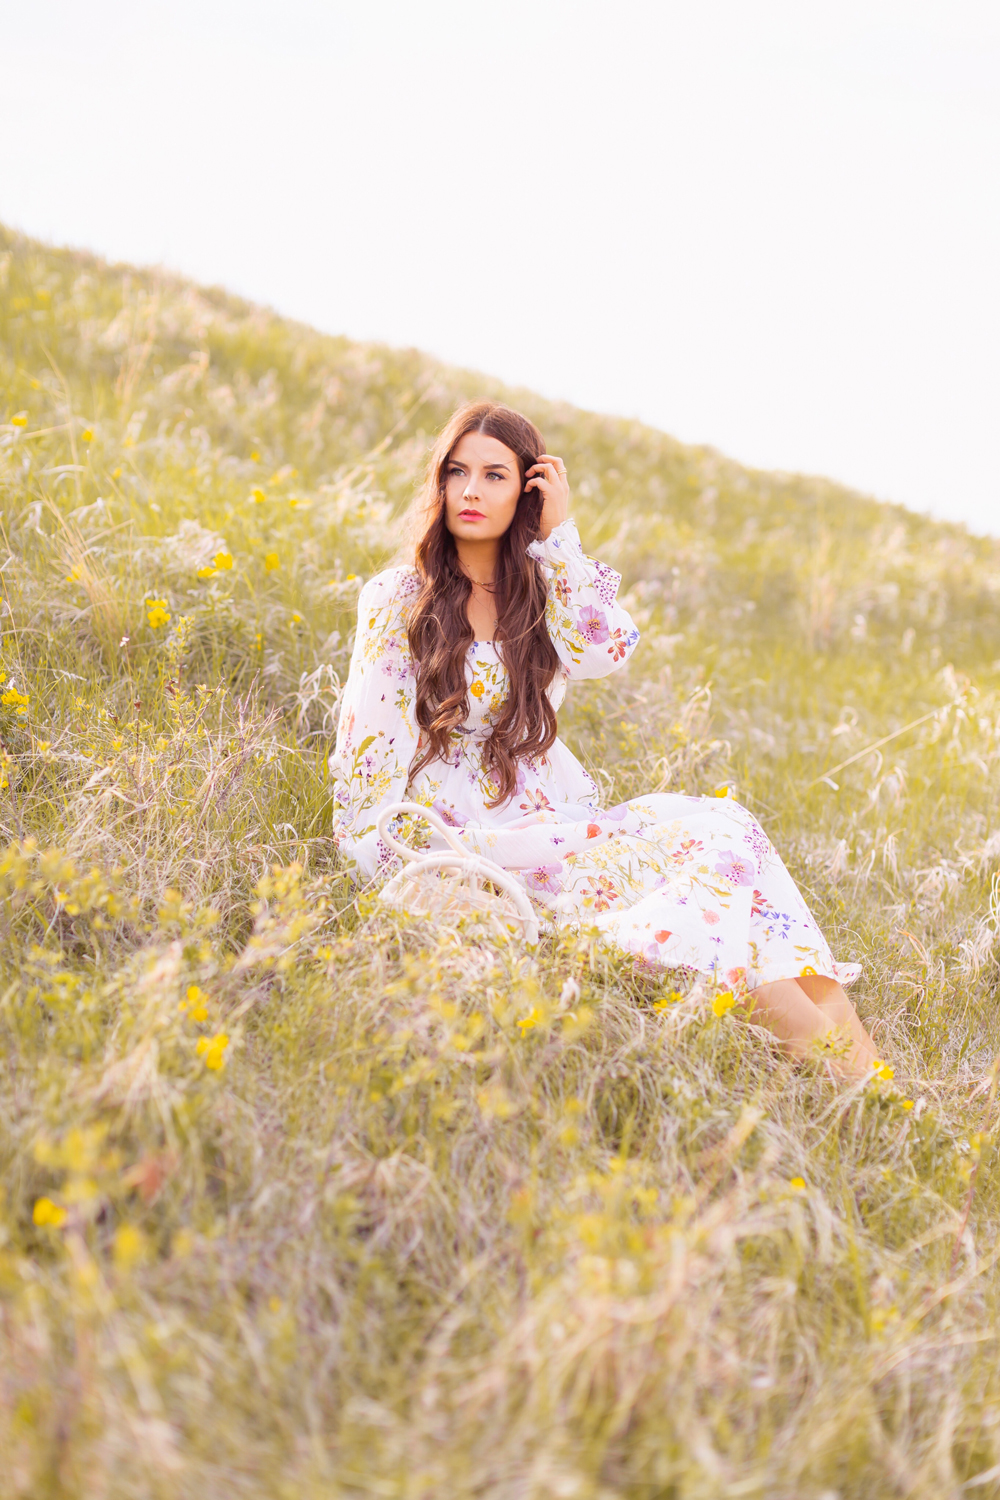 H&M Wildflower Collection Review | Brunette woman wearing a H&M A Meadow of Wildflowers Collection Smock-Detail Dress sitting in a prairie field with yellow sunflowers | H&M Wildflower Collection Canada | H&M Wildflower Collection Canada | Spring/Summer 2021 Trends | The Best Cotton Dresses 2021 | Boho Spring / Summer Outfit Ideas | The Best H&M Dresses Summer 2021 | Alberta Wildflower Field | Cottagecore Outfits | Calgary Creative Lifestyle & Fashion Blogger // JustineCelina.com